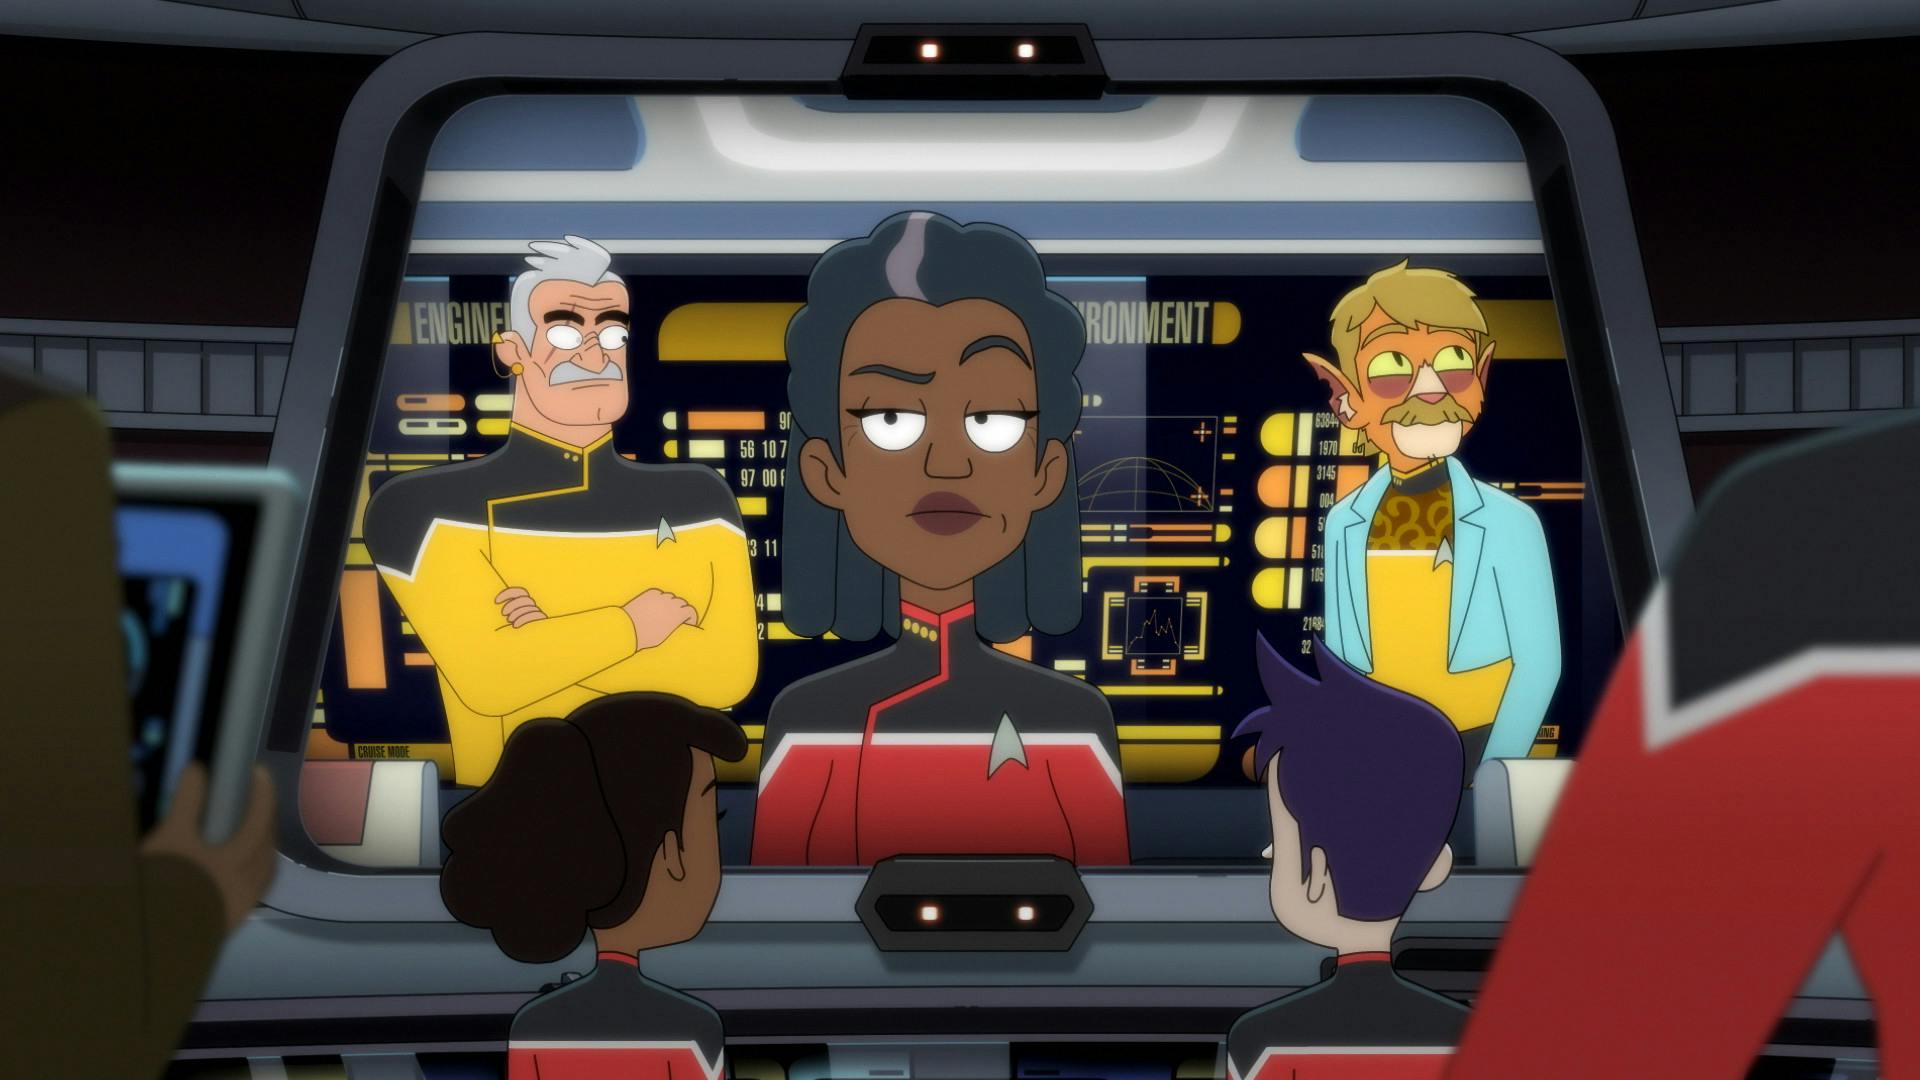 The Curator, Ransom, Mariner, and Boimler facing the Voyager's viewscreen communicates with the Cerritos' Captain Carol Freeman, Shaxs, and T'Illups in 'Twovix'